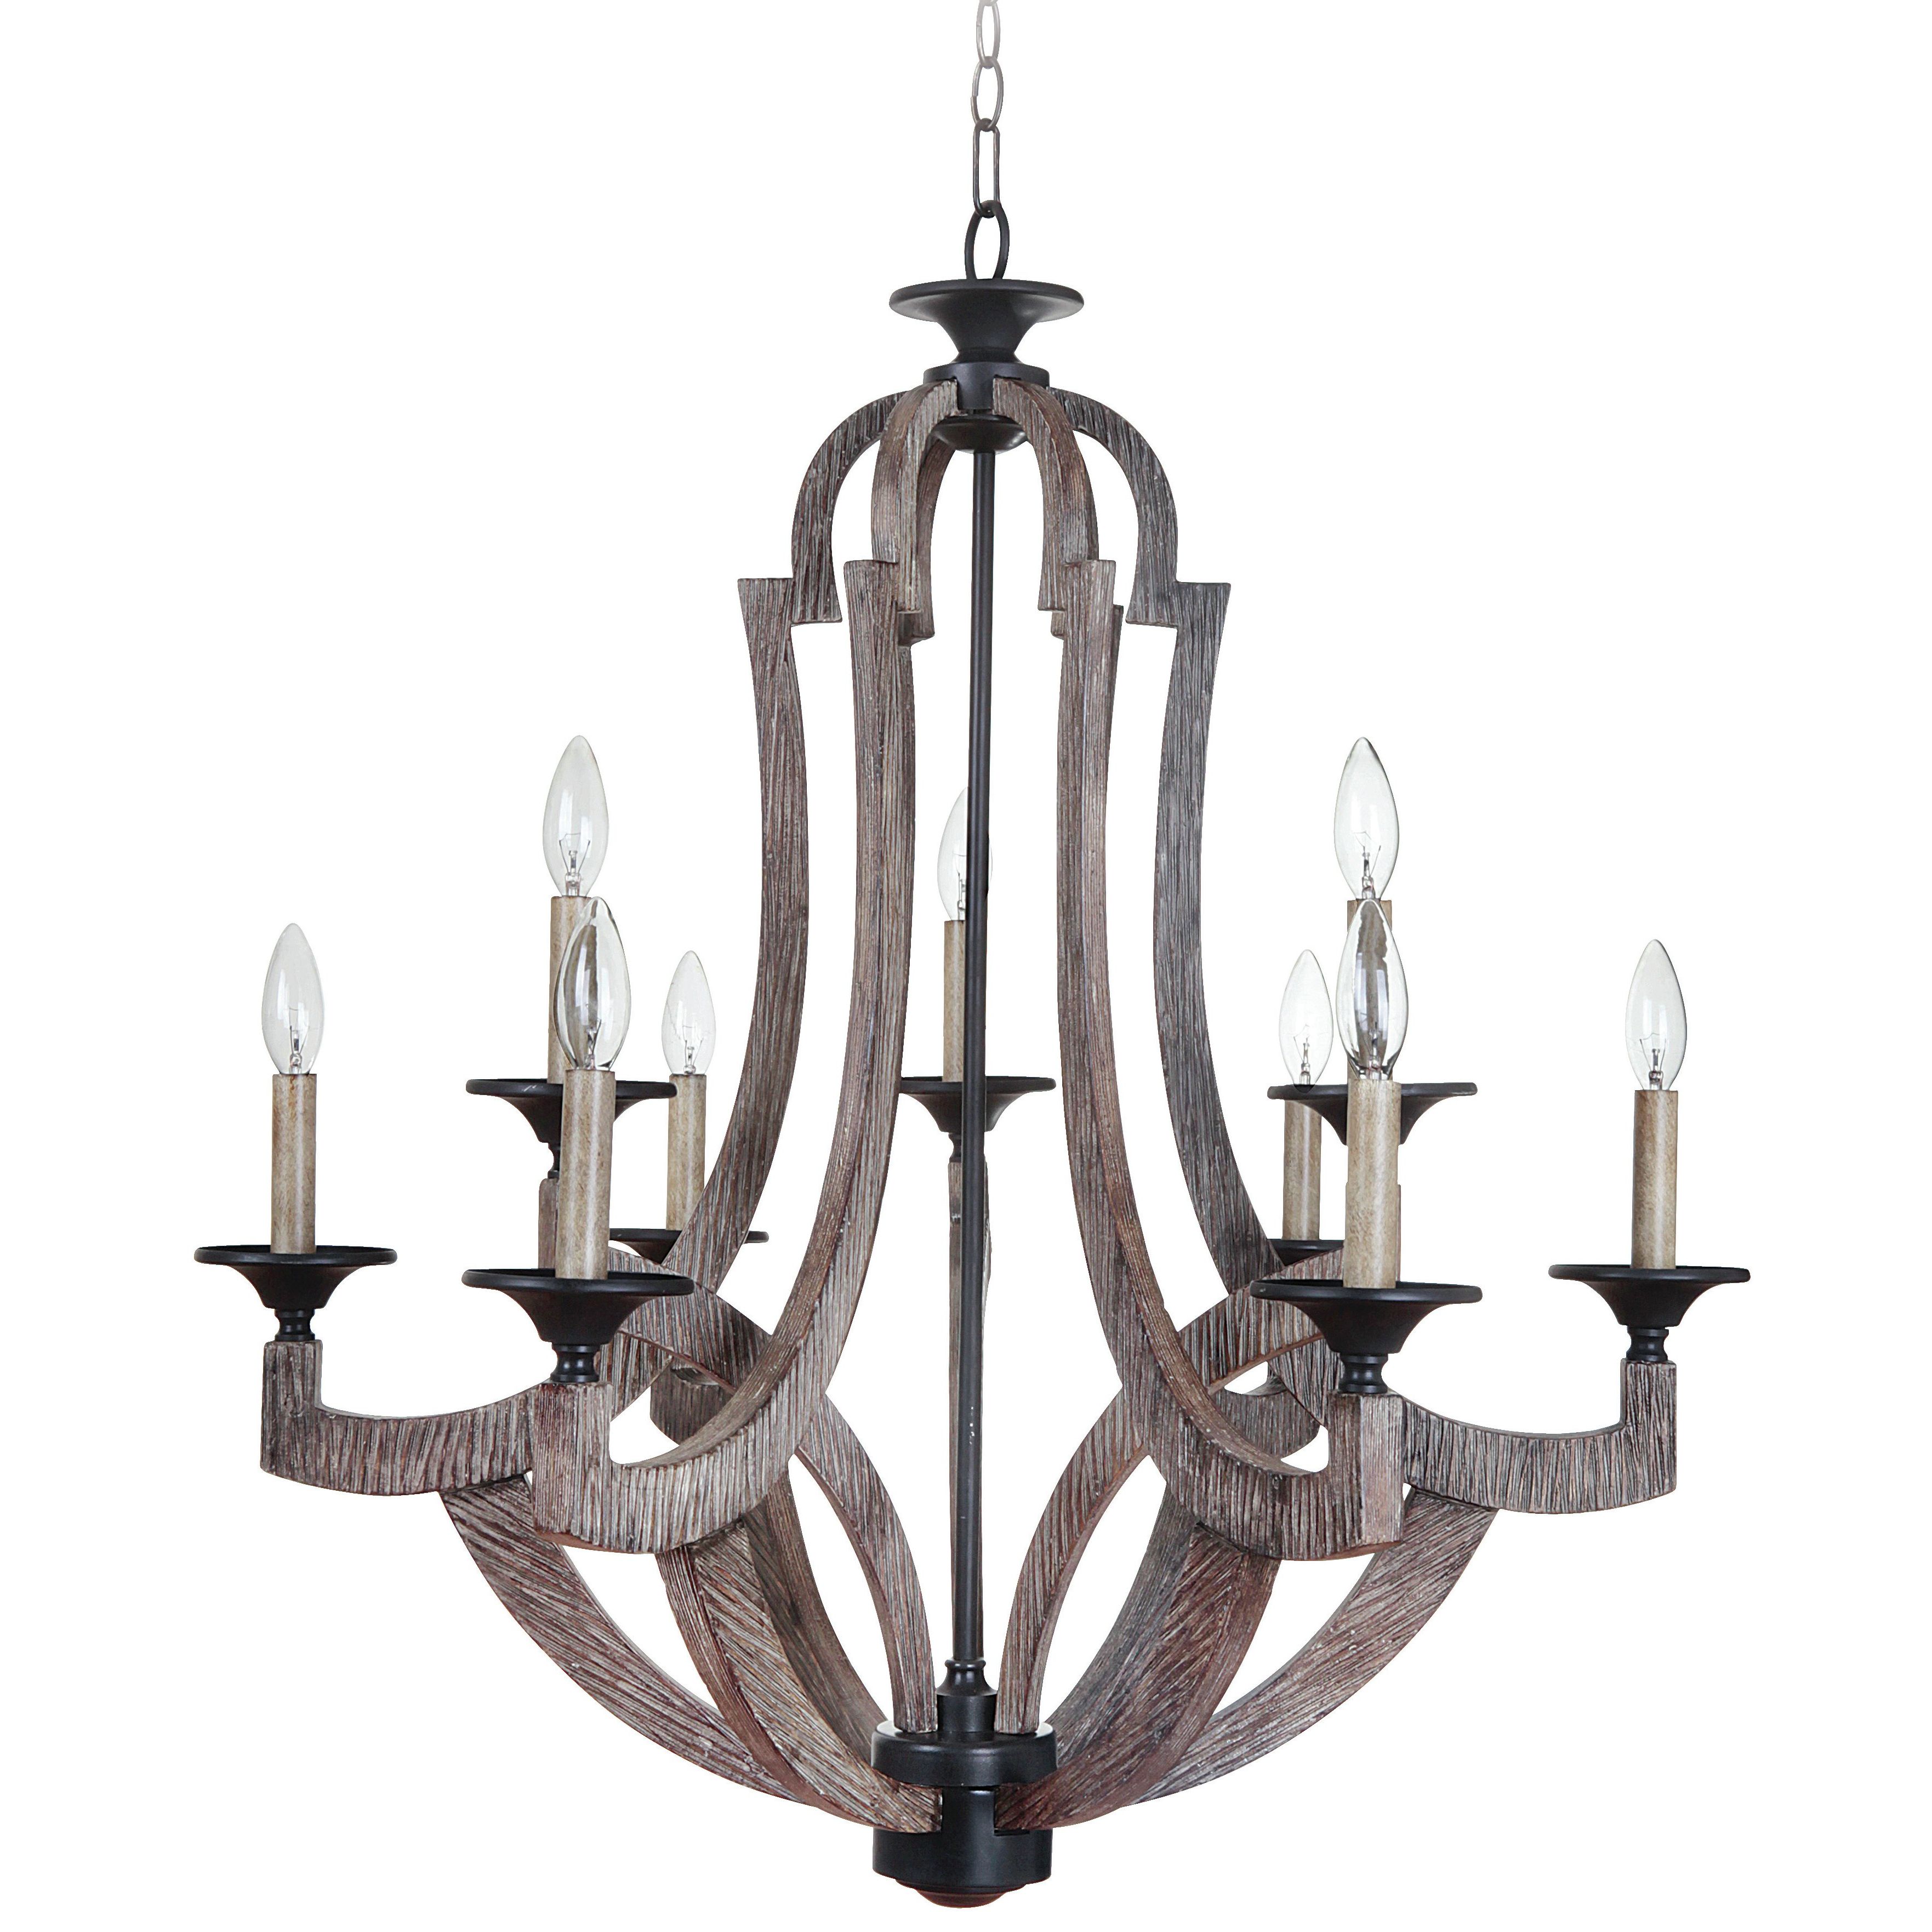 Camilla 9 Light Candle Style Chandeliers Pertaining To 2020 Biddlesden 9 Light Candle Style Chandelier (View 5 of 25)